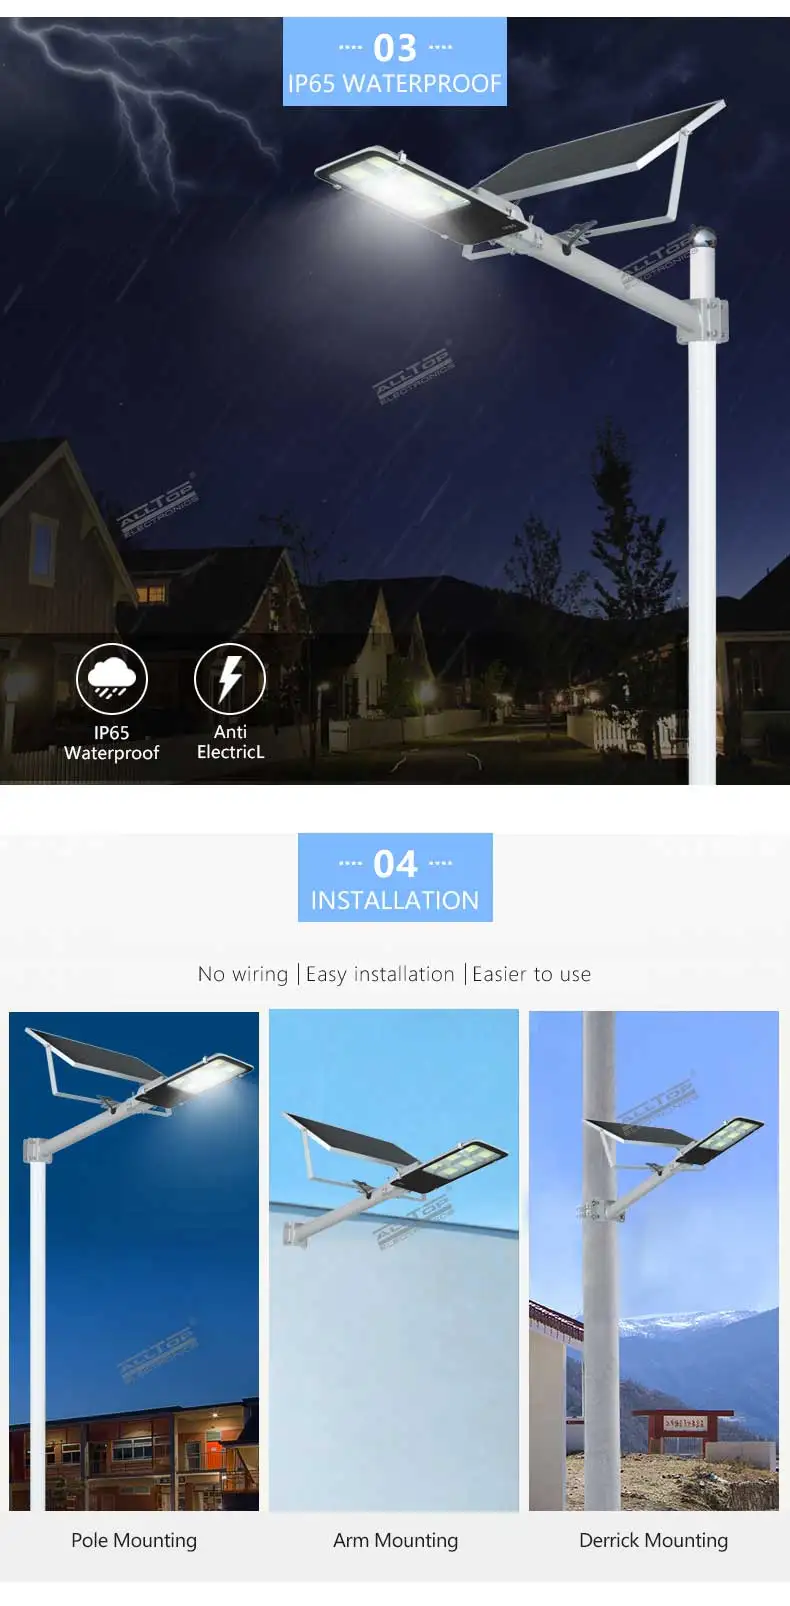 ALLTOP New product IP65 waterproof outdoor lighting 150w solar powered led road light